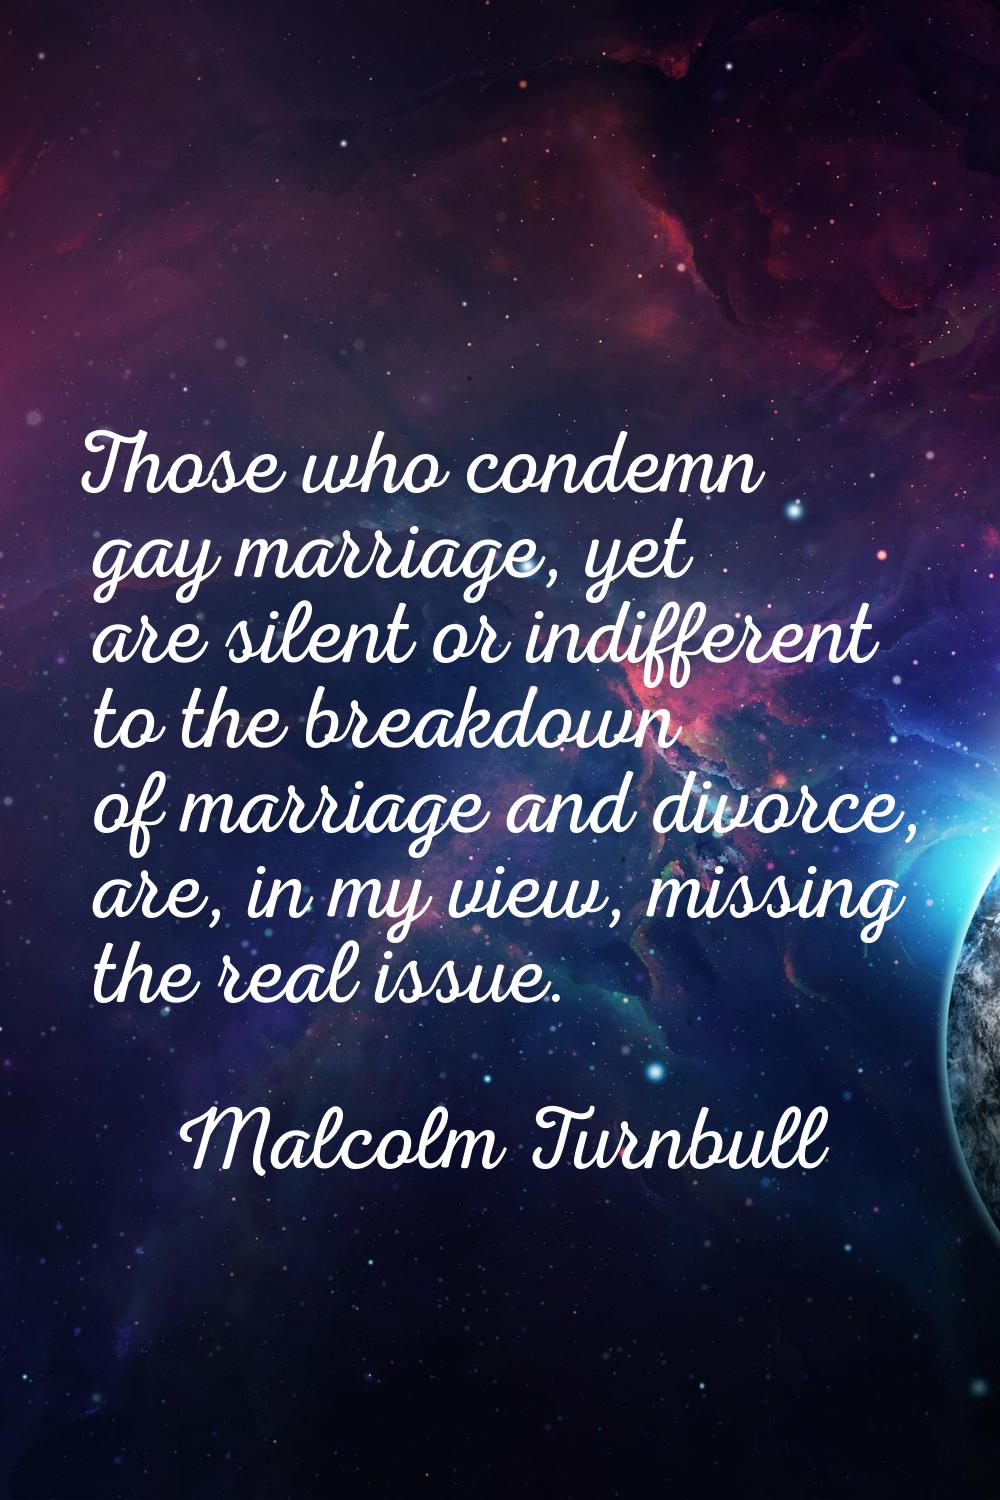 Those who condemn gay marriage, yet are silent or indifferent to the breakdown of marriage and divo